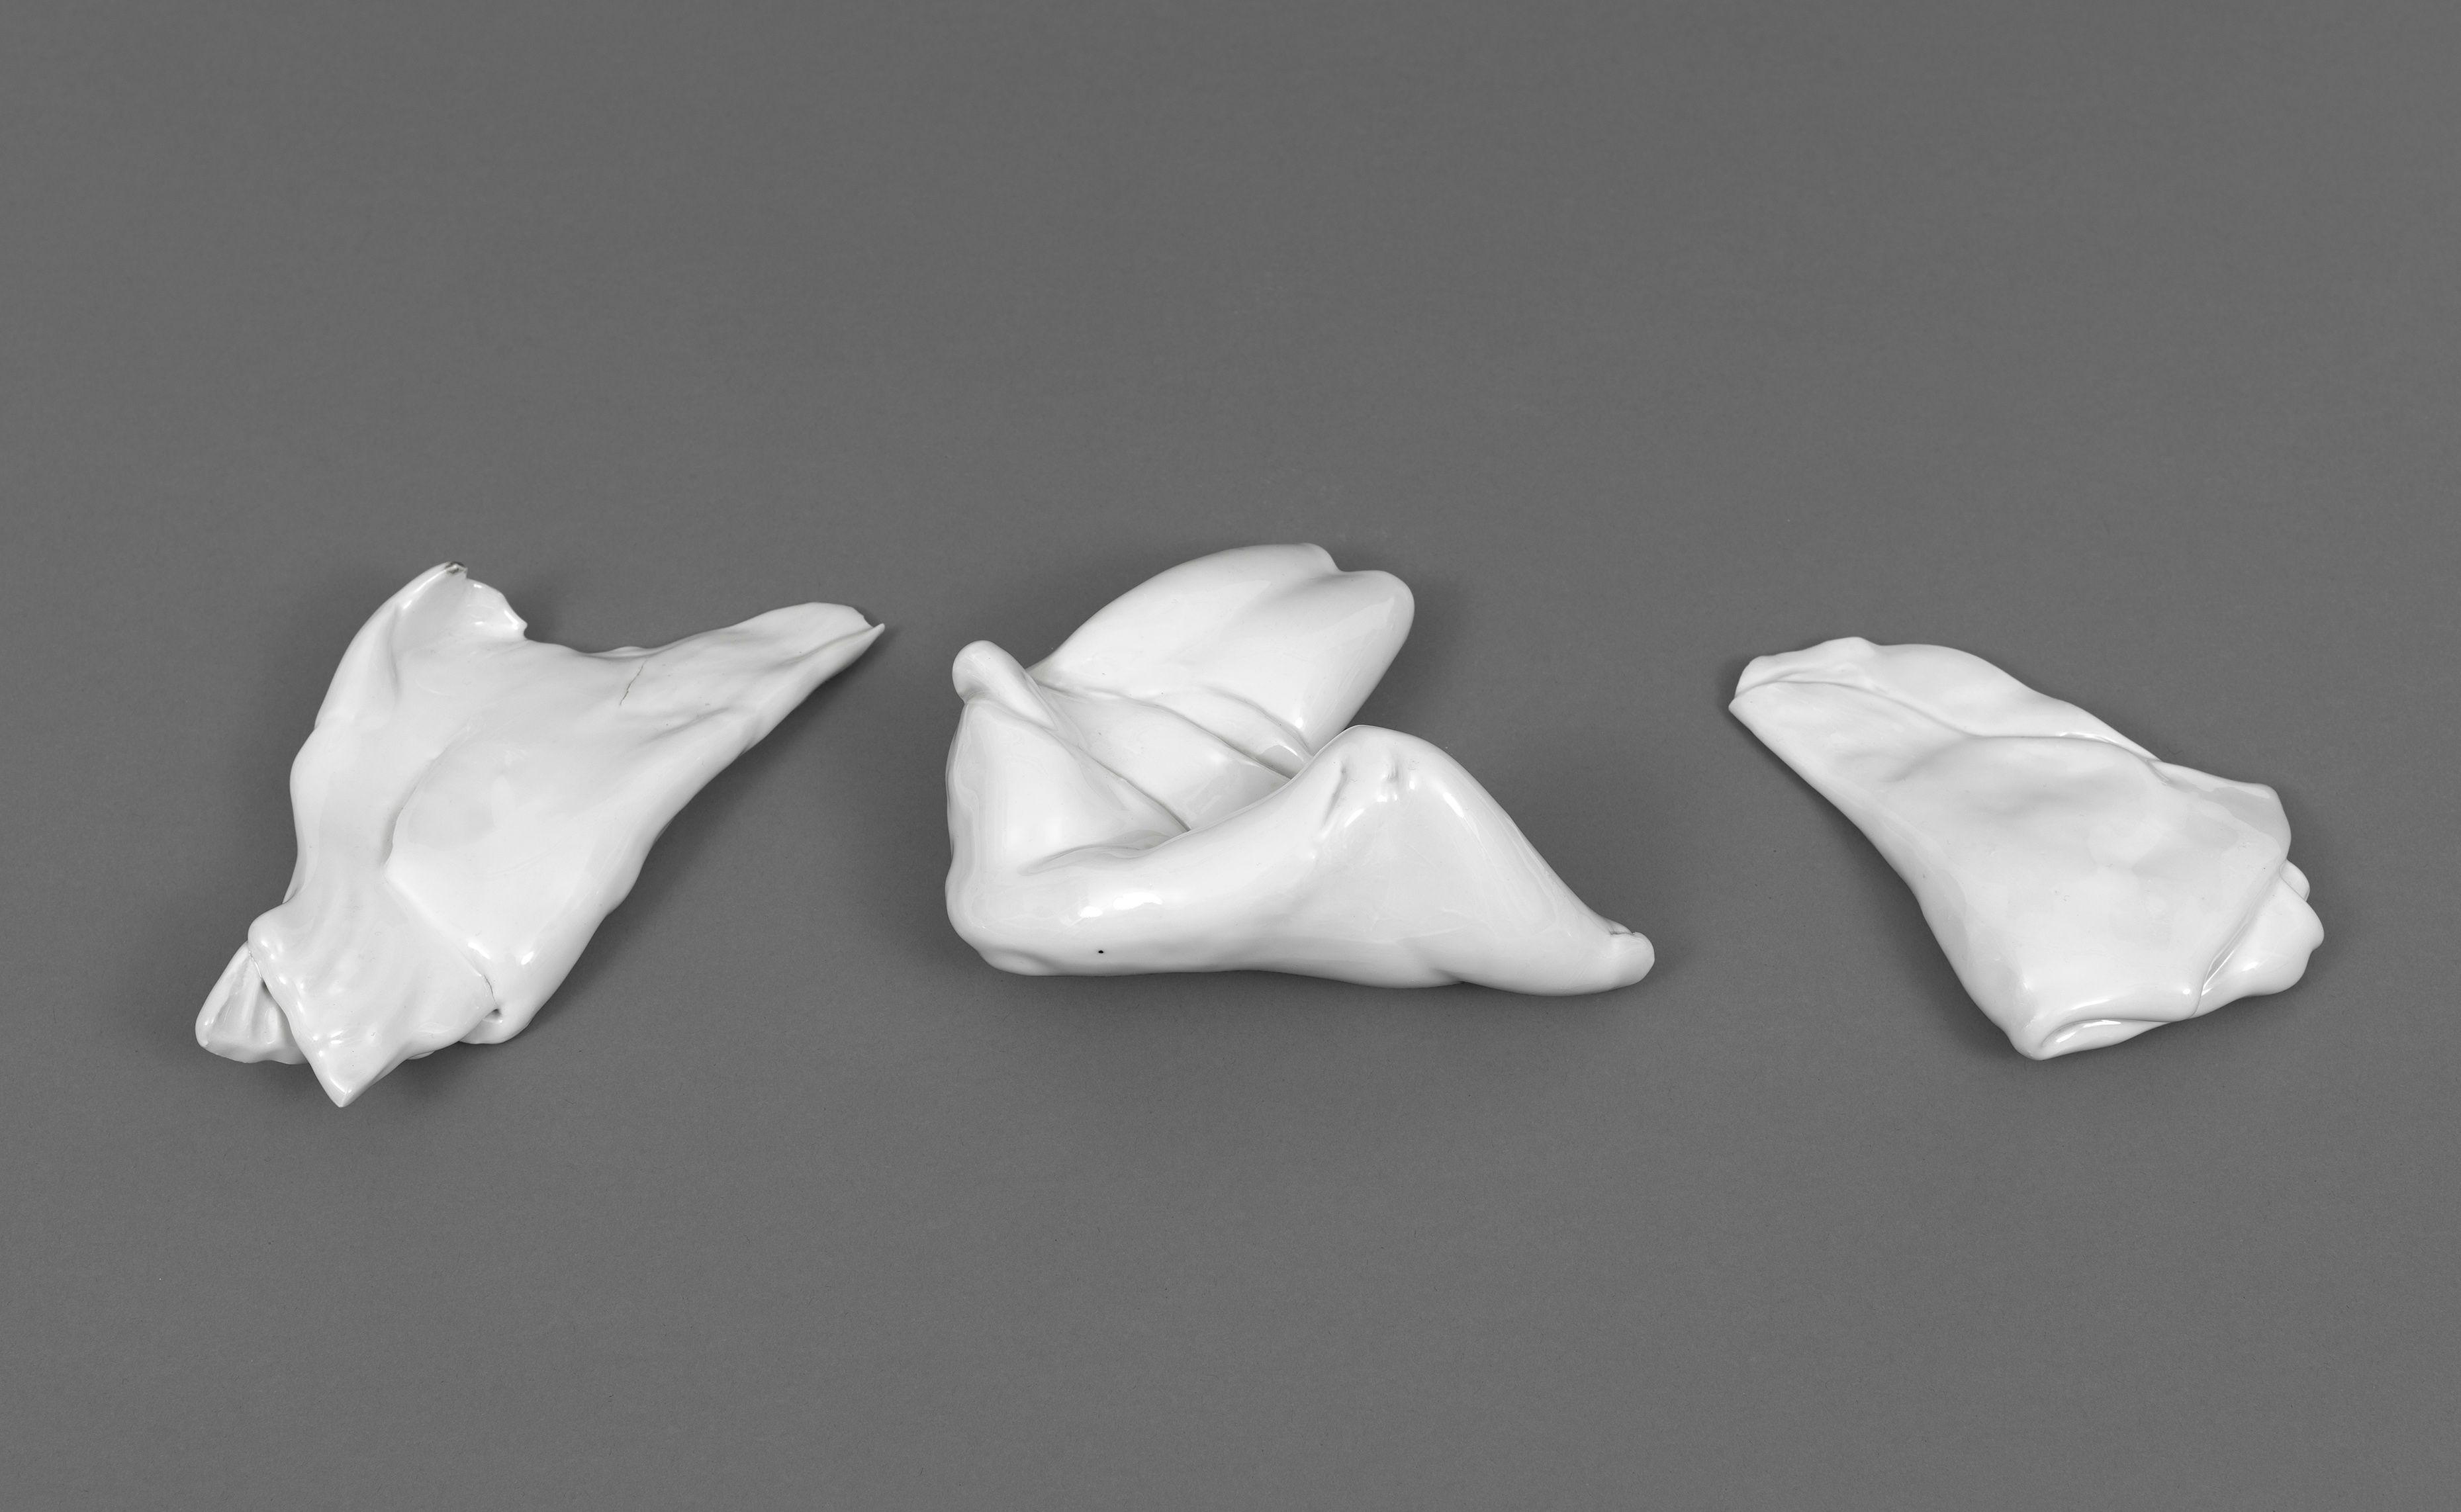 Model (Melted tea cups), from Working Table objects